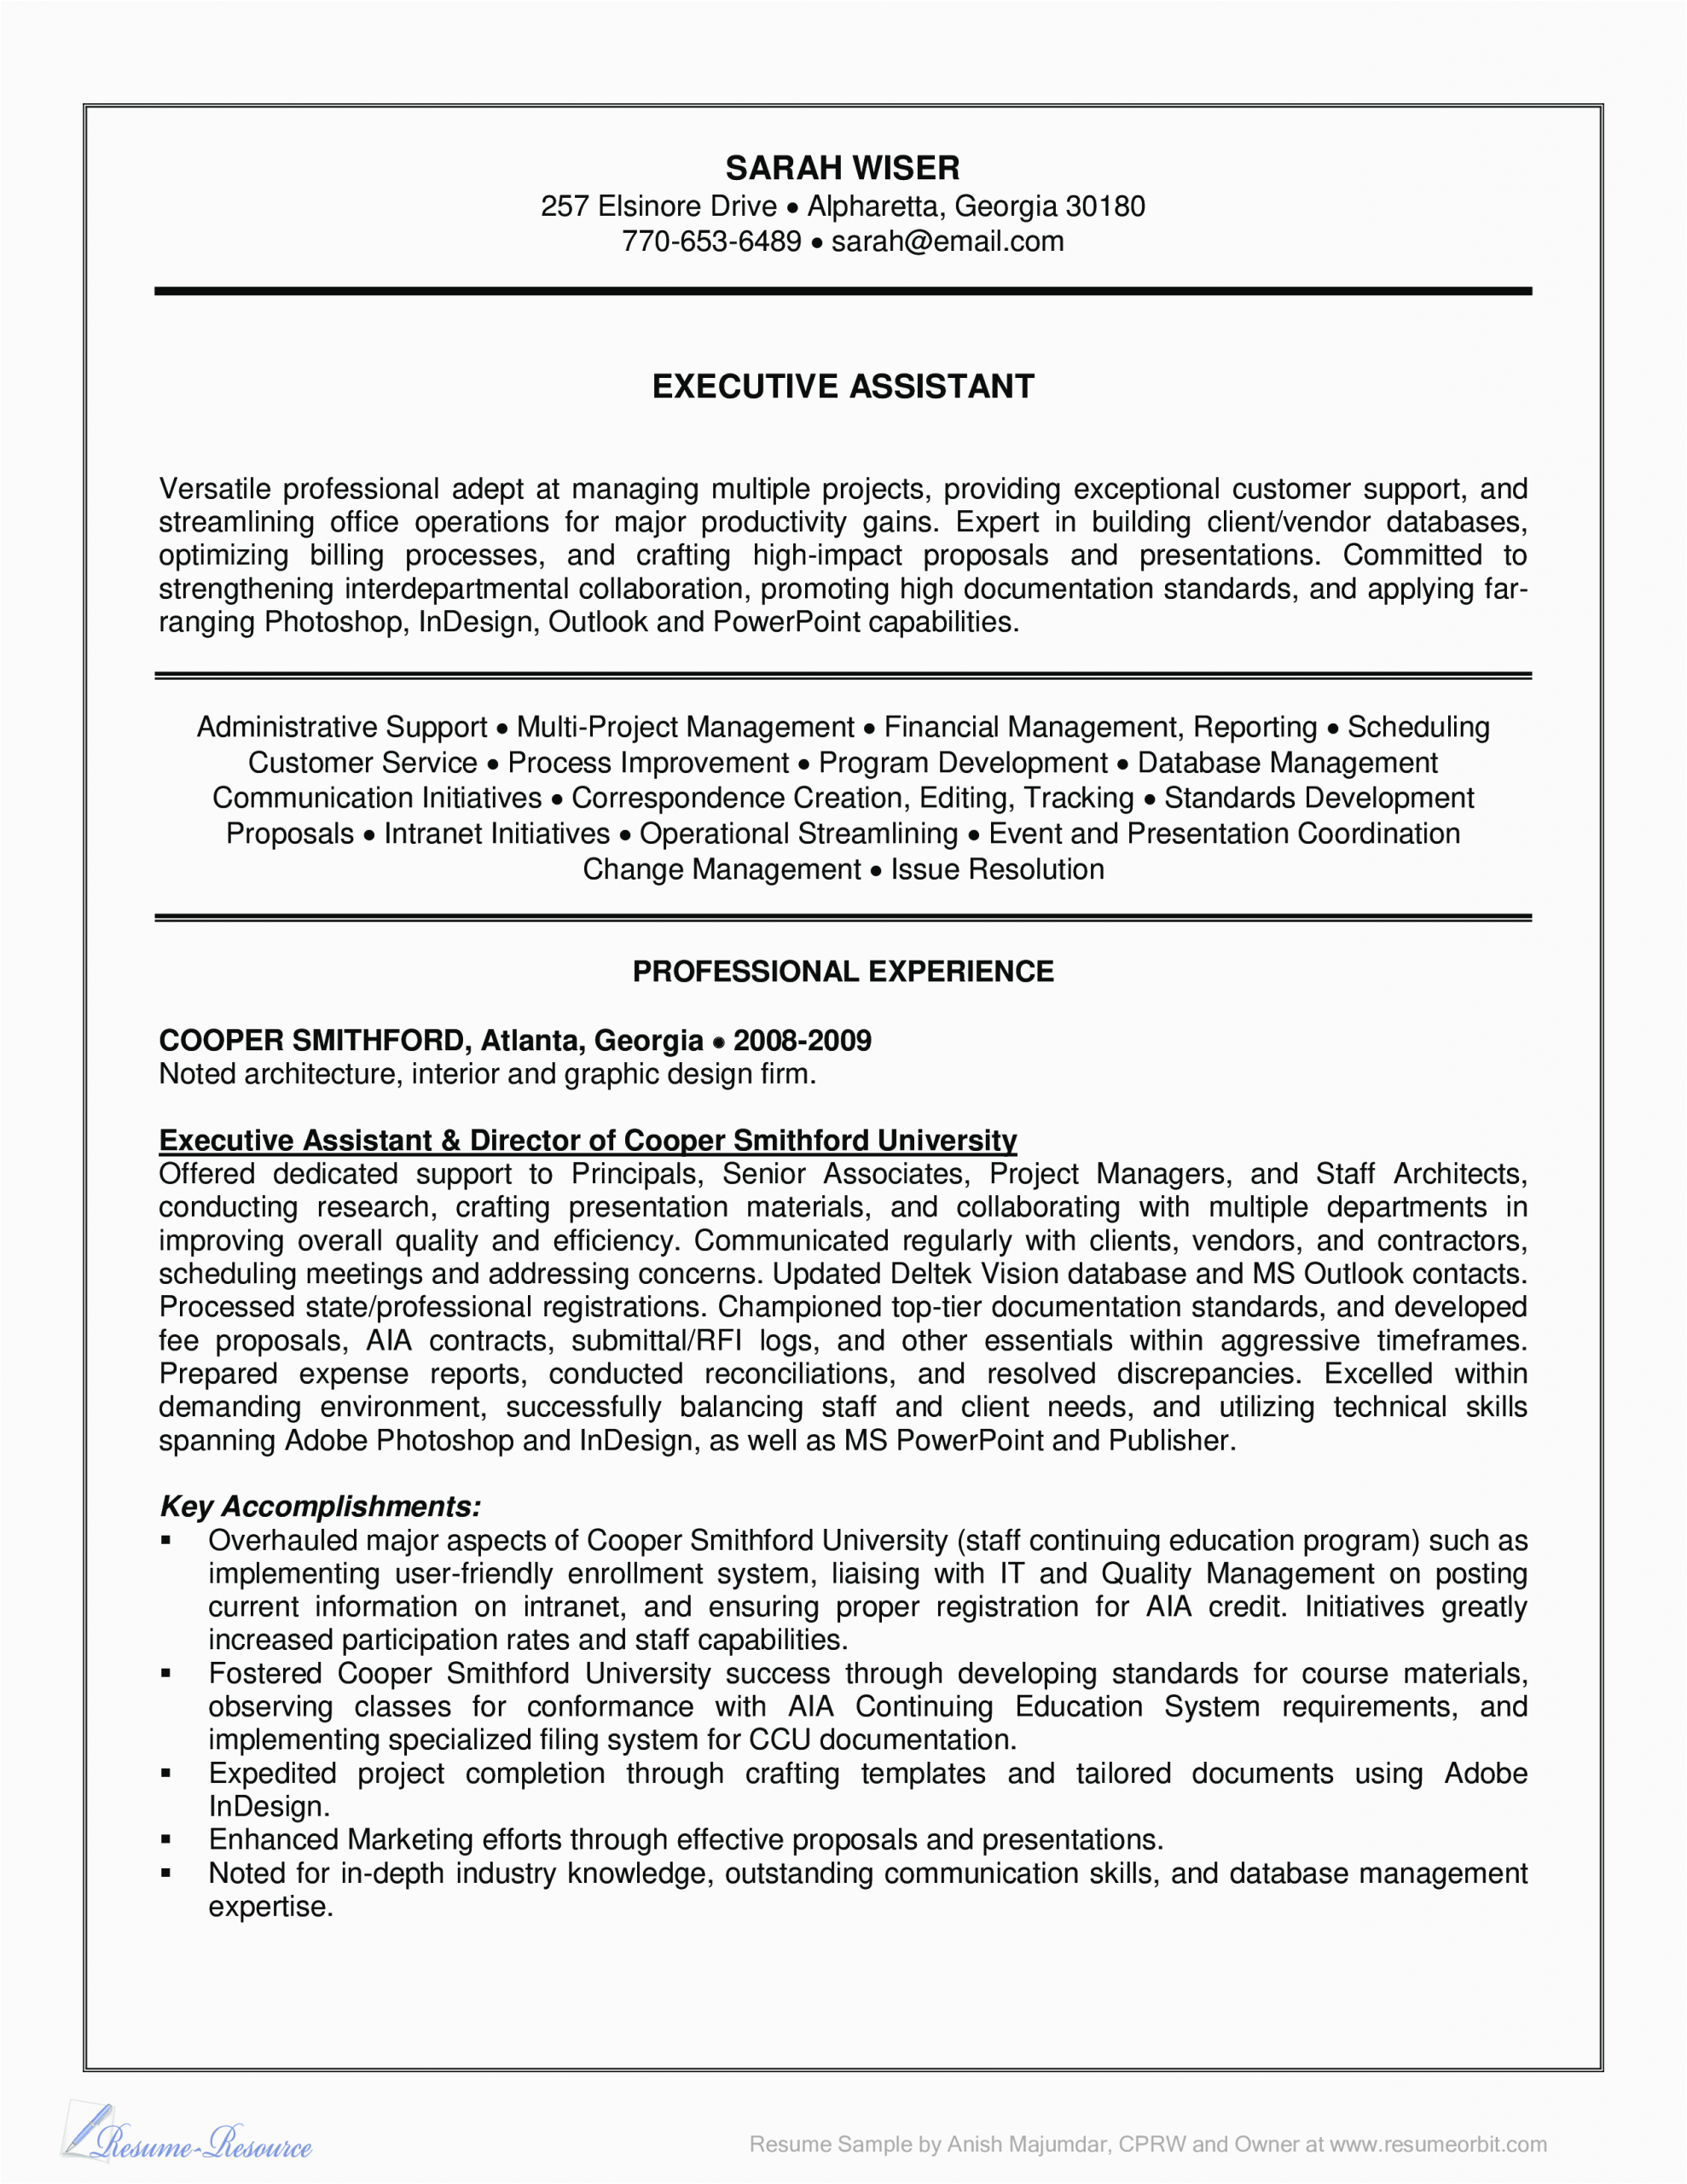 Sample Of Resume for Executive assistant Professional Executive assistant Resume